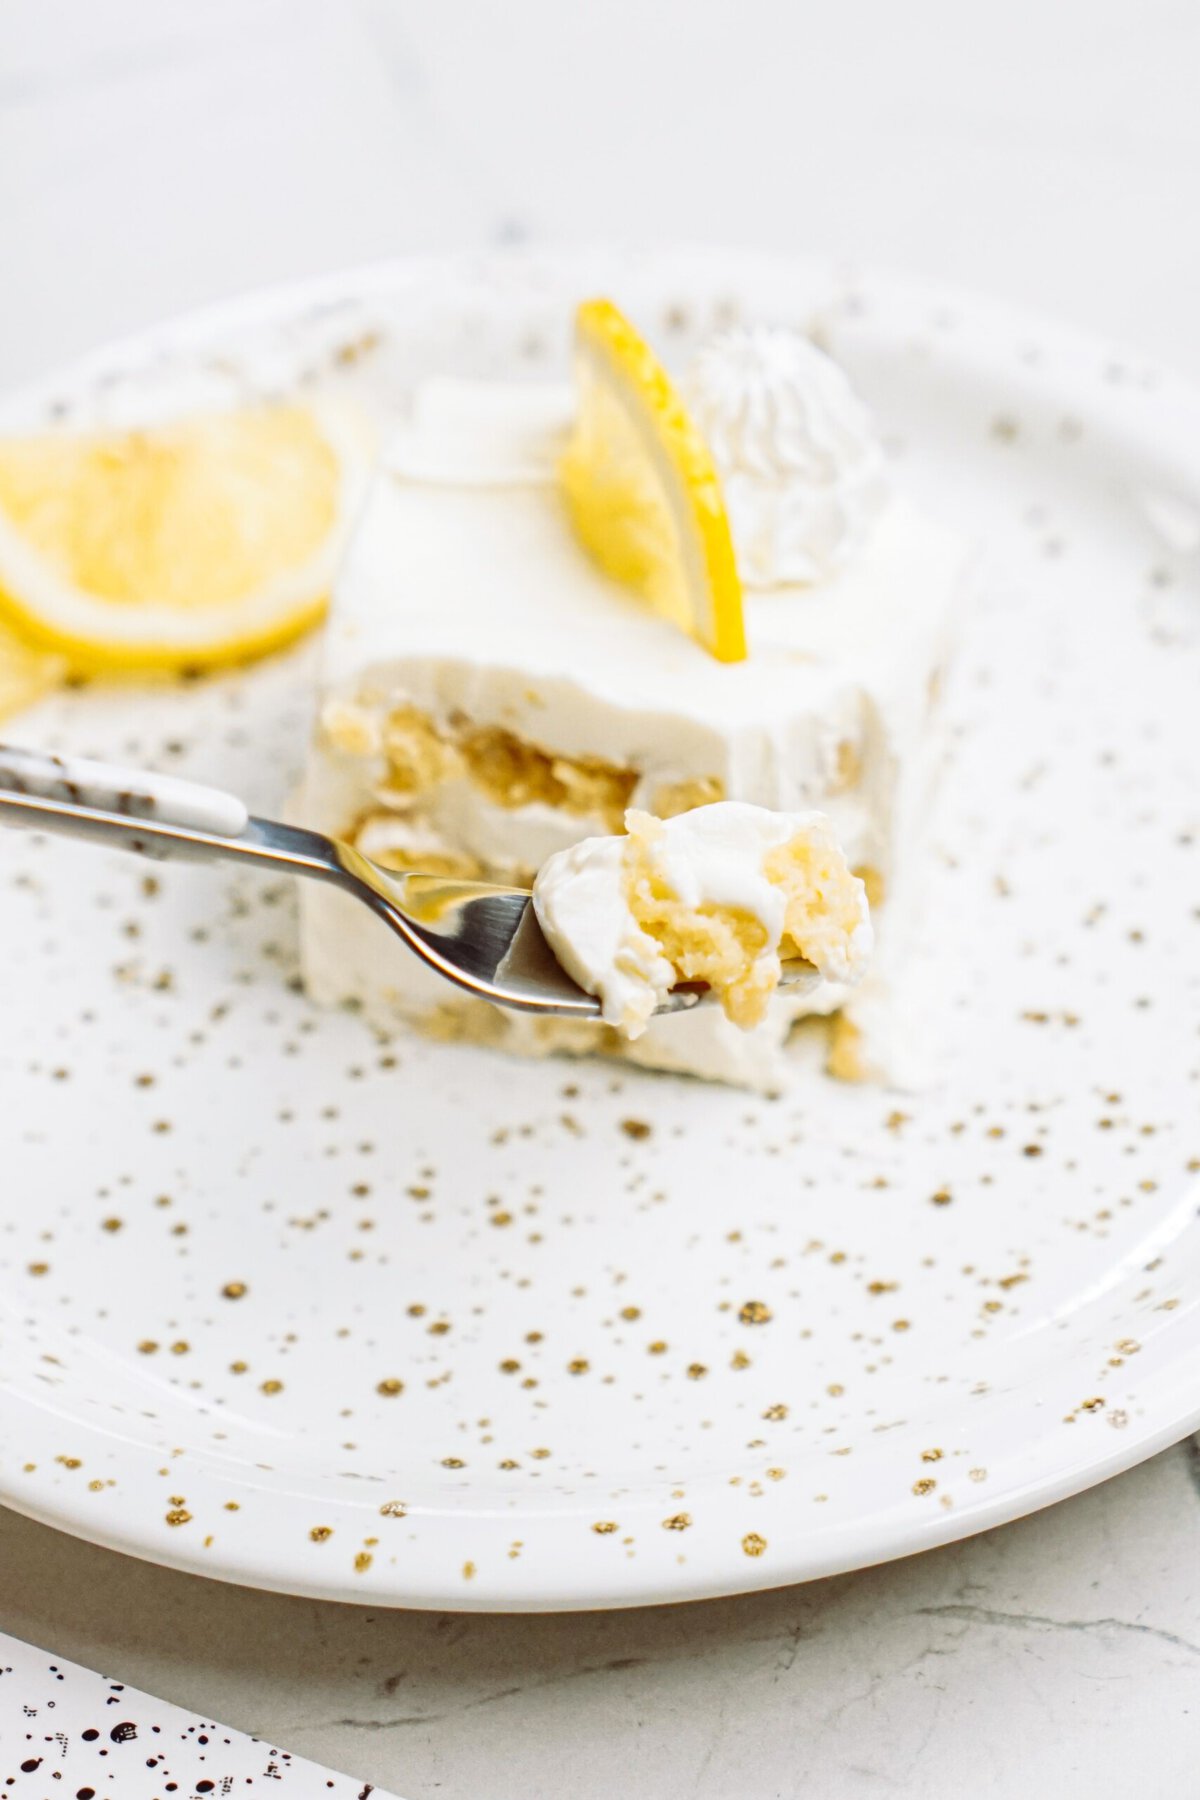 A slice of lemon cake with whipped cream on a speckled plate, garnished with a lemon slice, with a fork taking a piece.